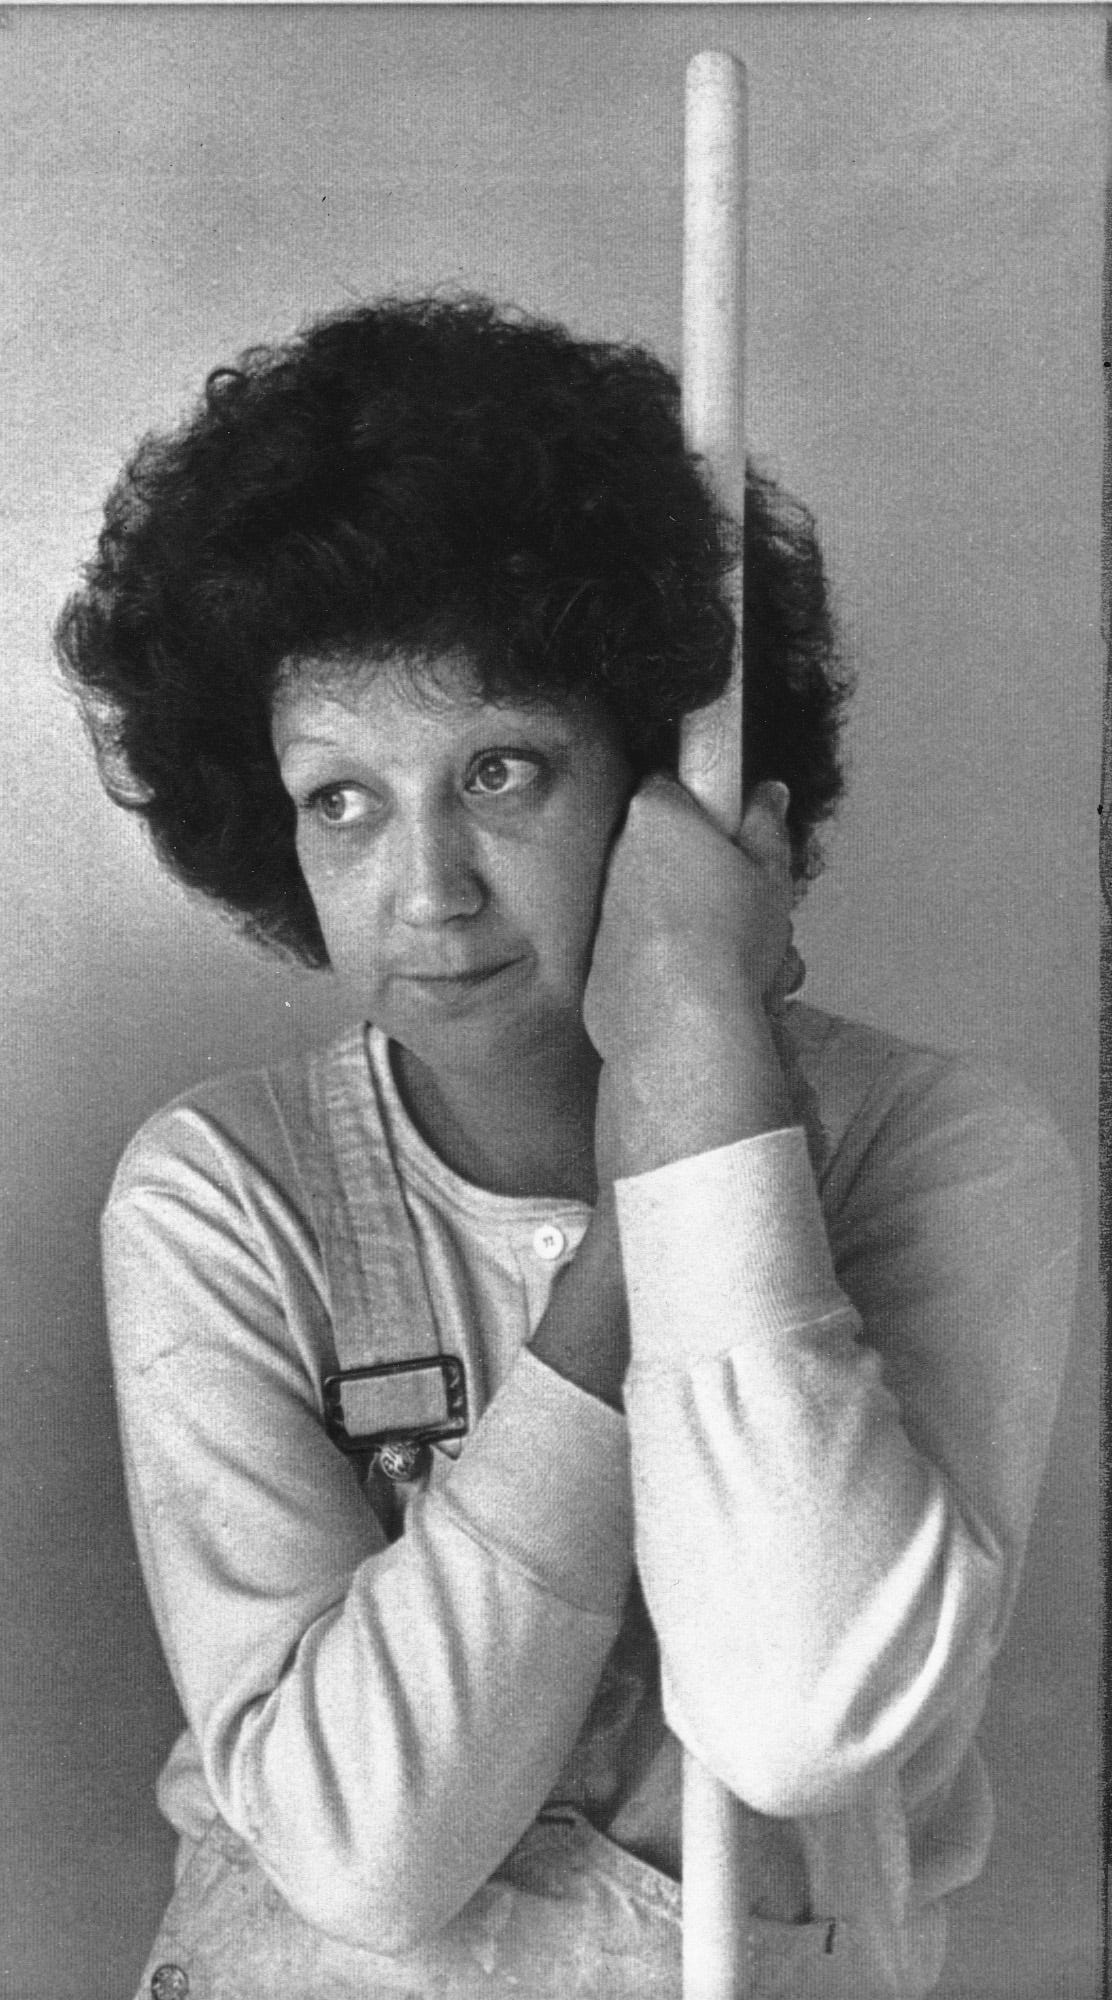 Norma McCorvey took time from her job as a house painter to pose for a photograph in Terrell, Texas, in 1983.